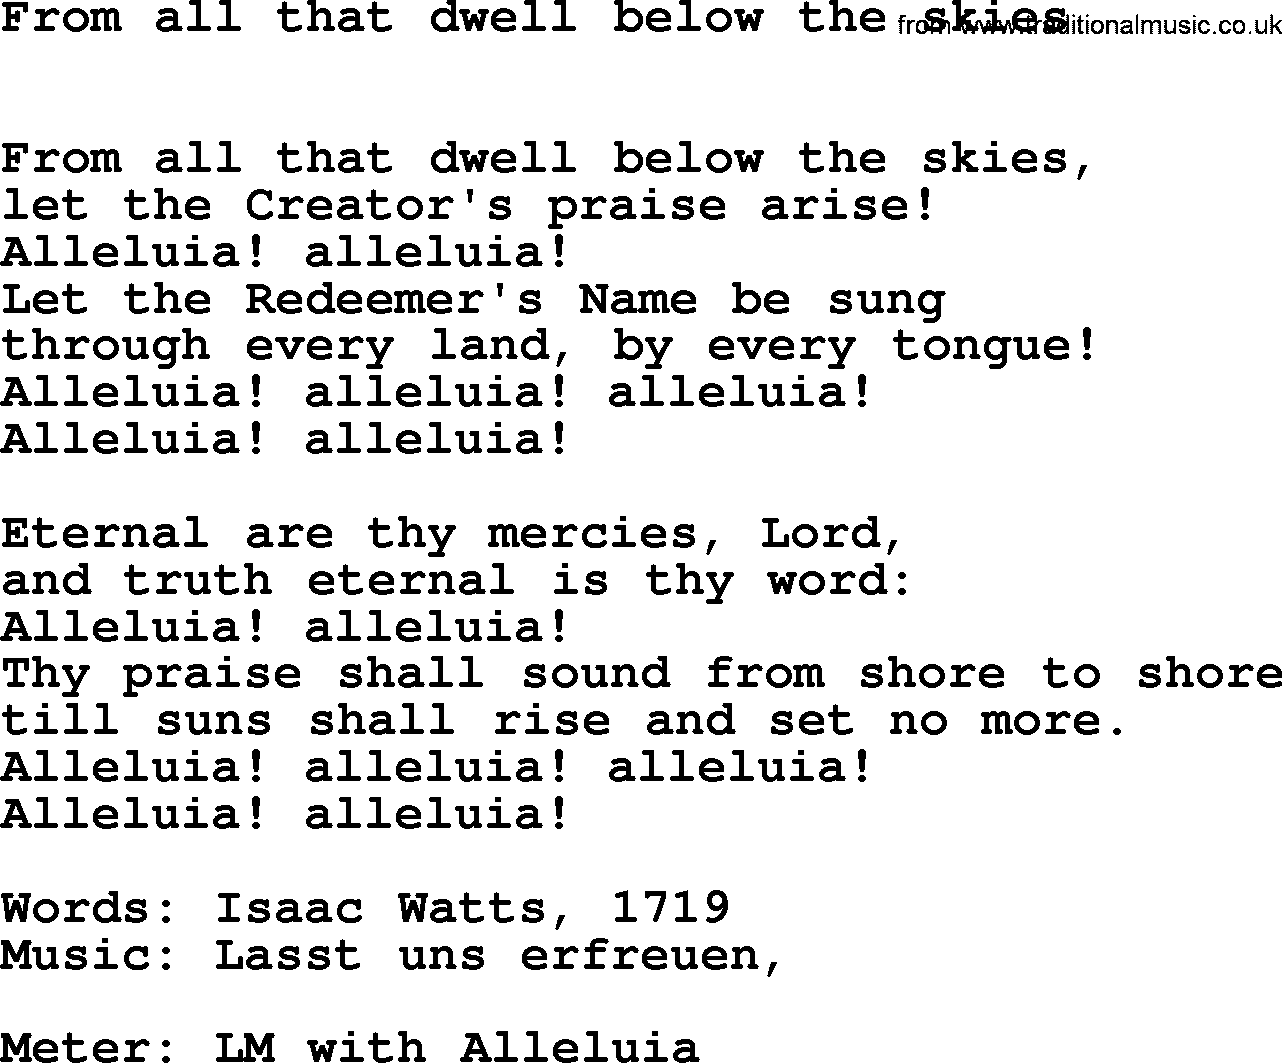 Book of Common Praise Hymn: From All That Dwell Below The Skies.txt lyrics with midi music